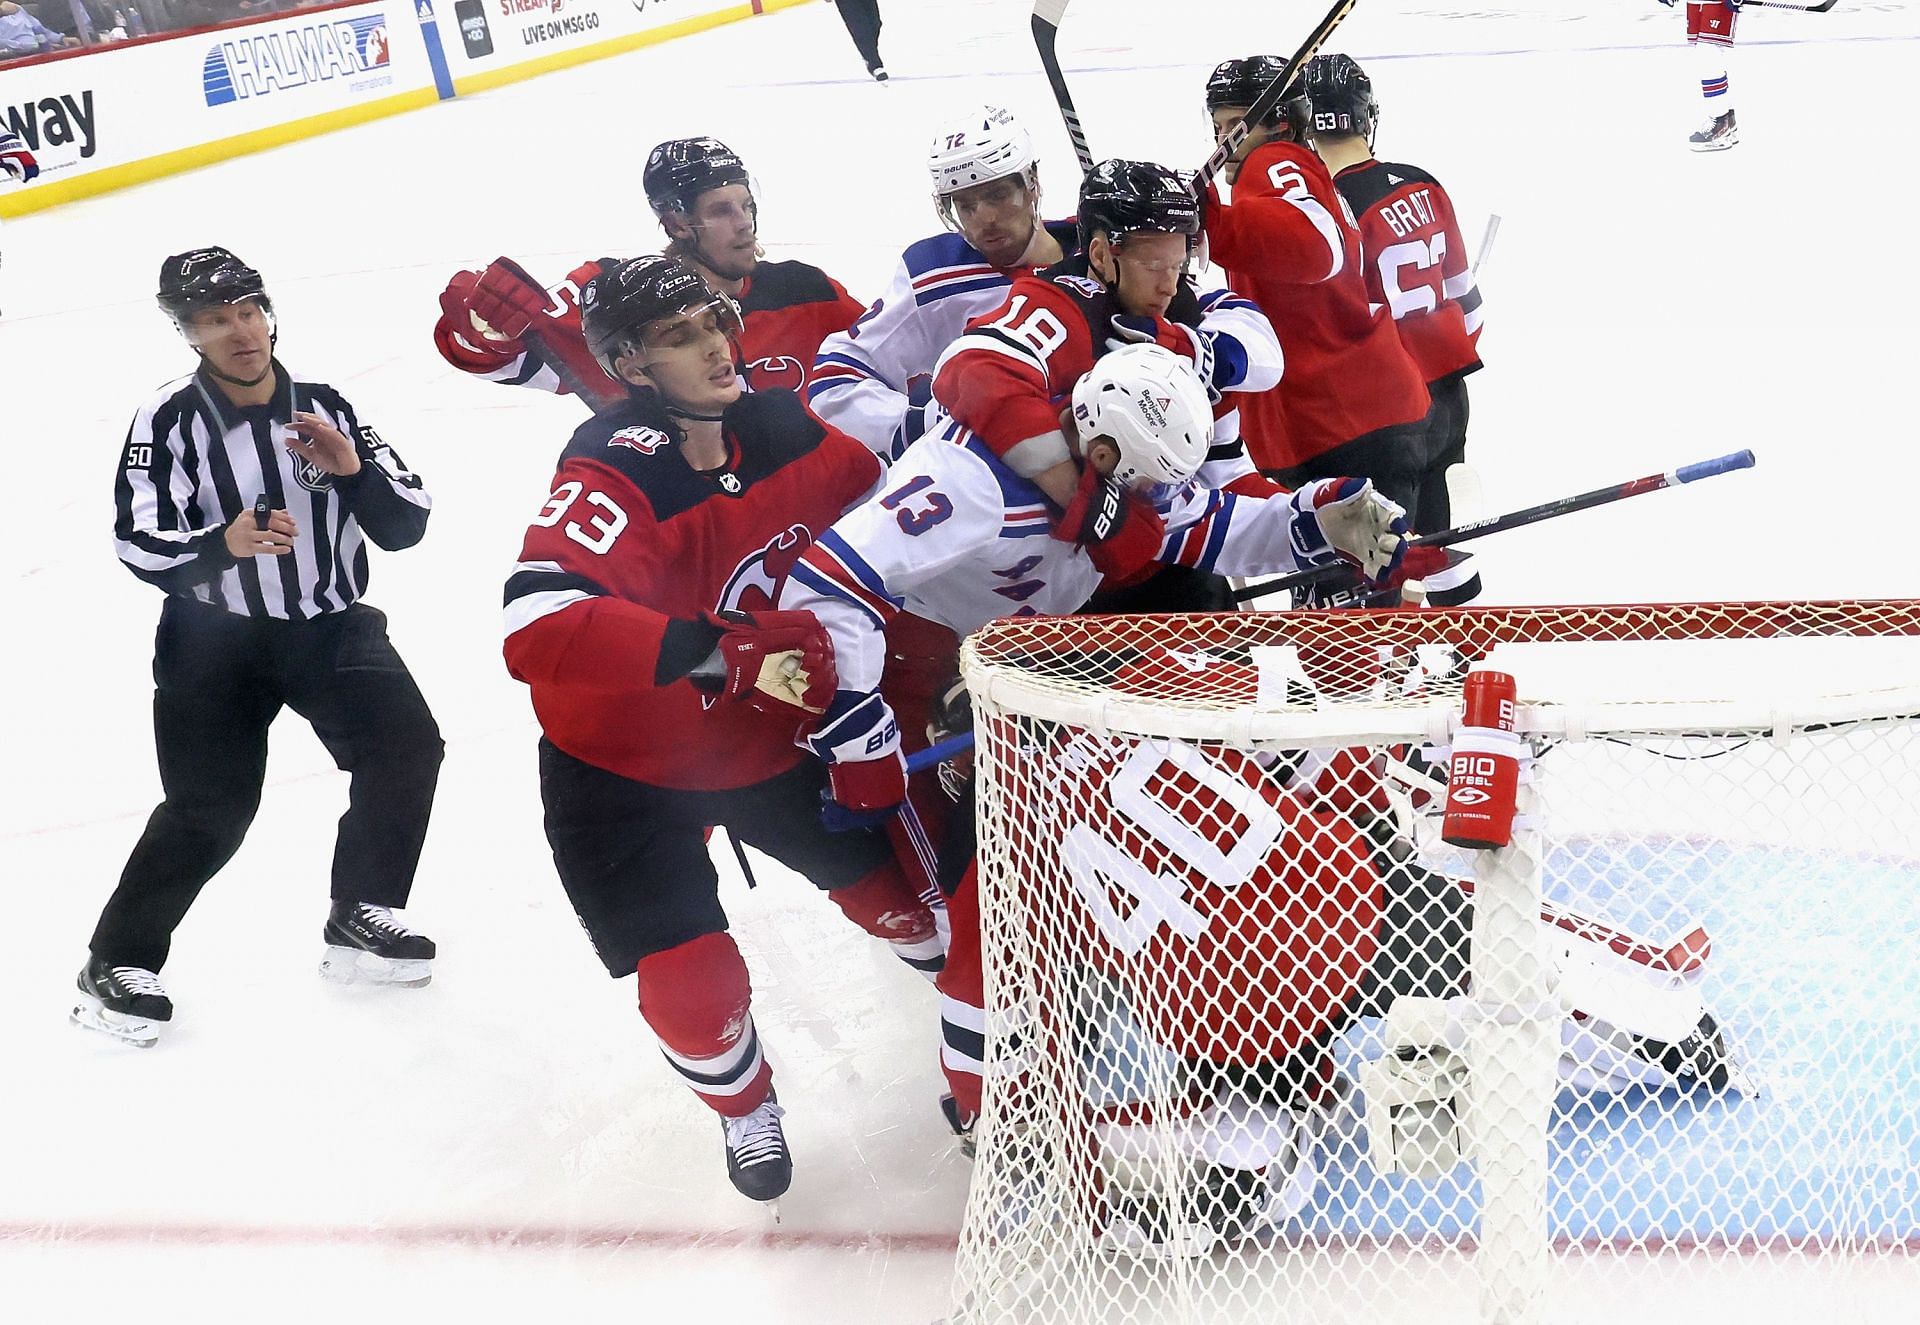 New Jersey Devils head into game 6 against Rangers with 3-2 lead